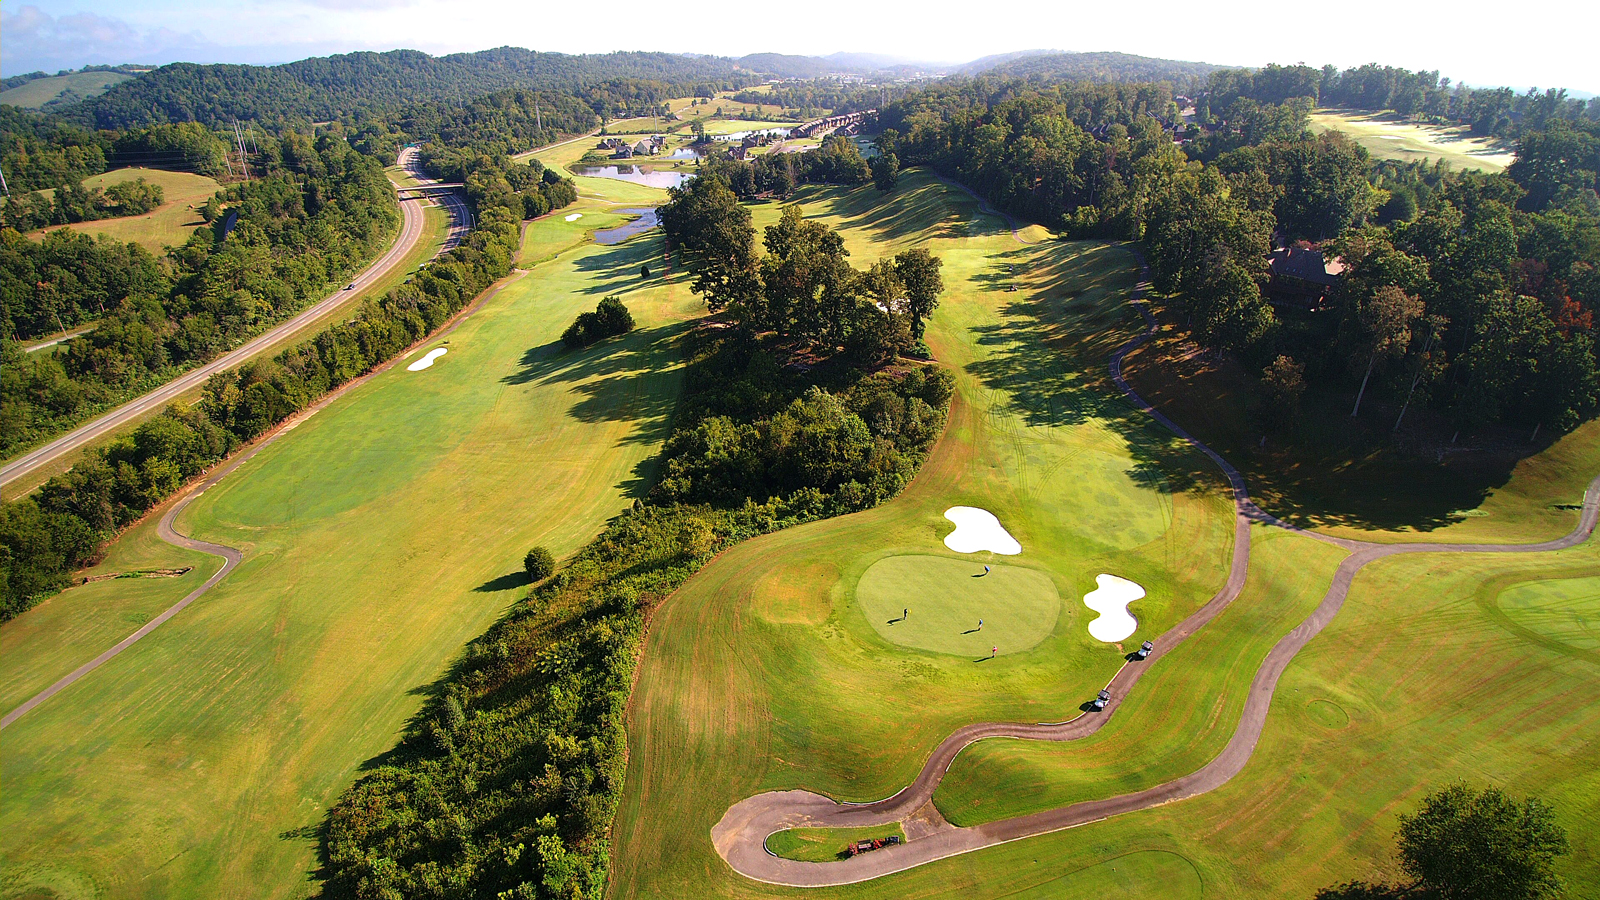 Drone Avalon Golf Course Community Photography in Knoxville Tennessee